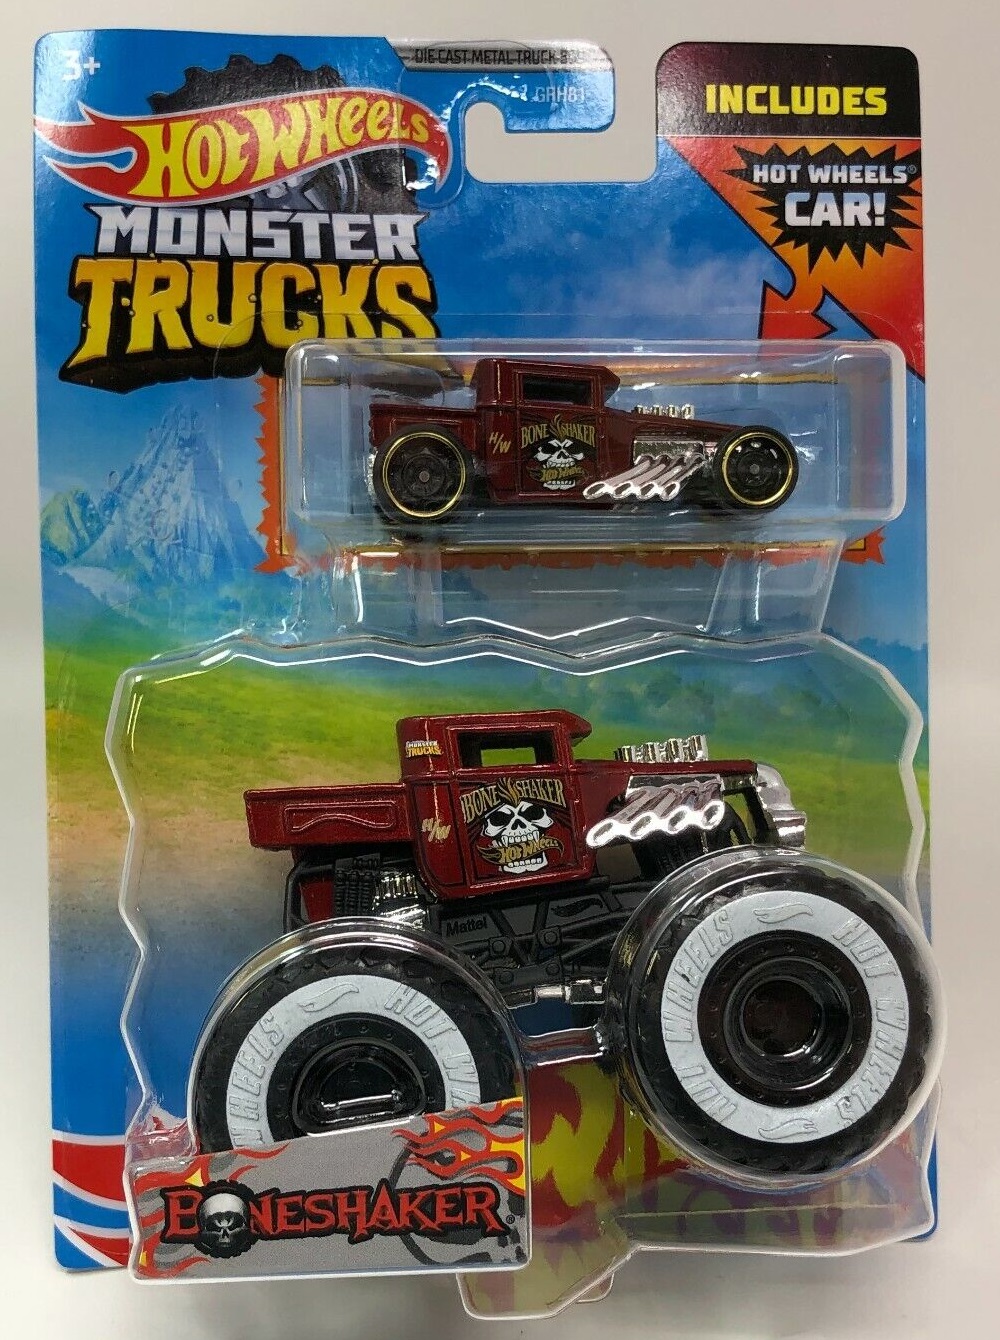 Hot Wheels 2022 - Monster Truck / Color Shifter - Bone Shaker - White to  Black with Flames